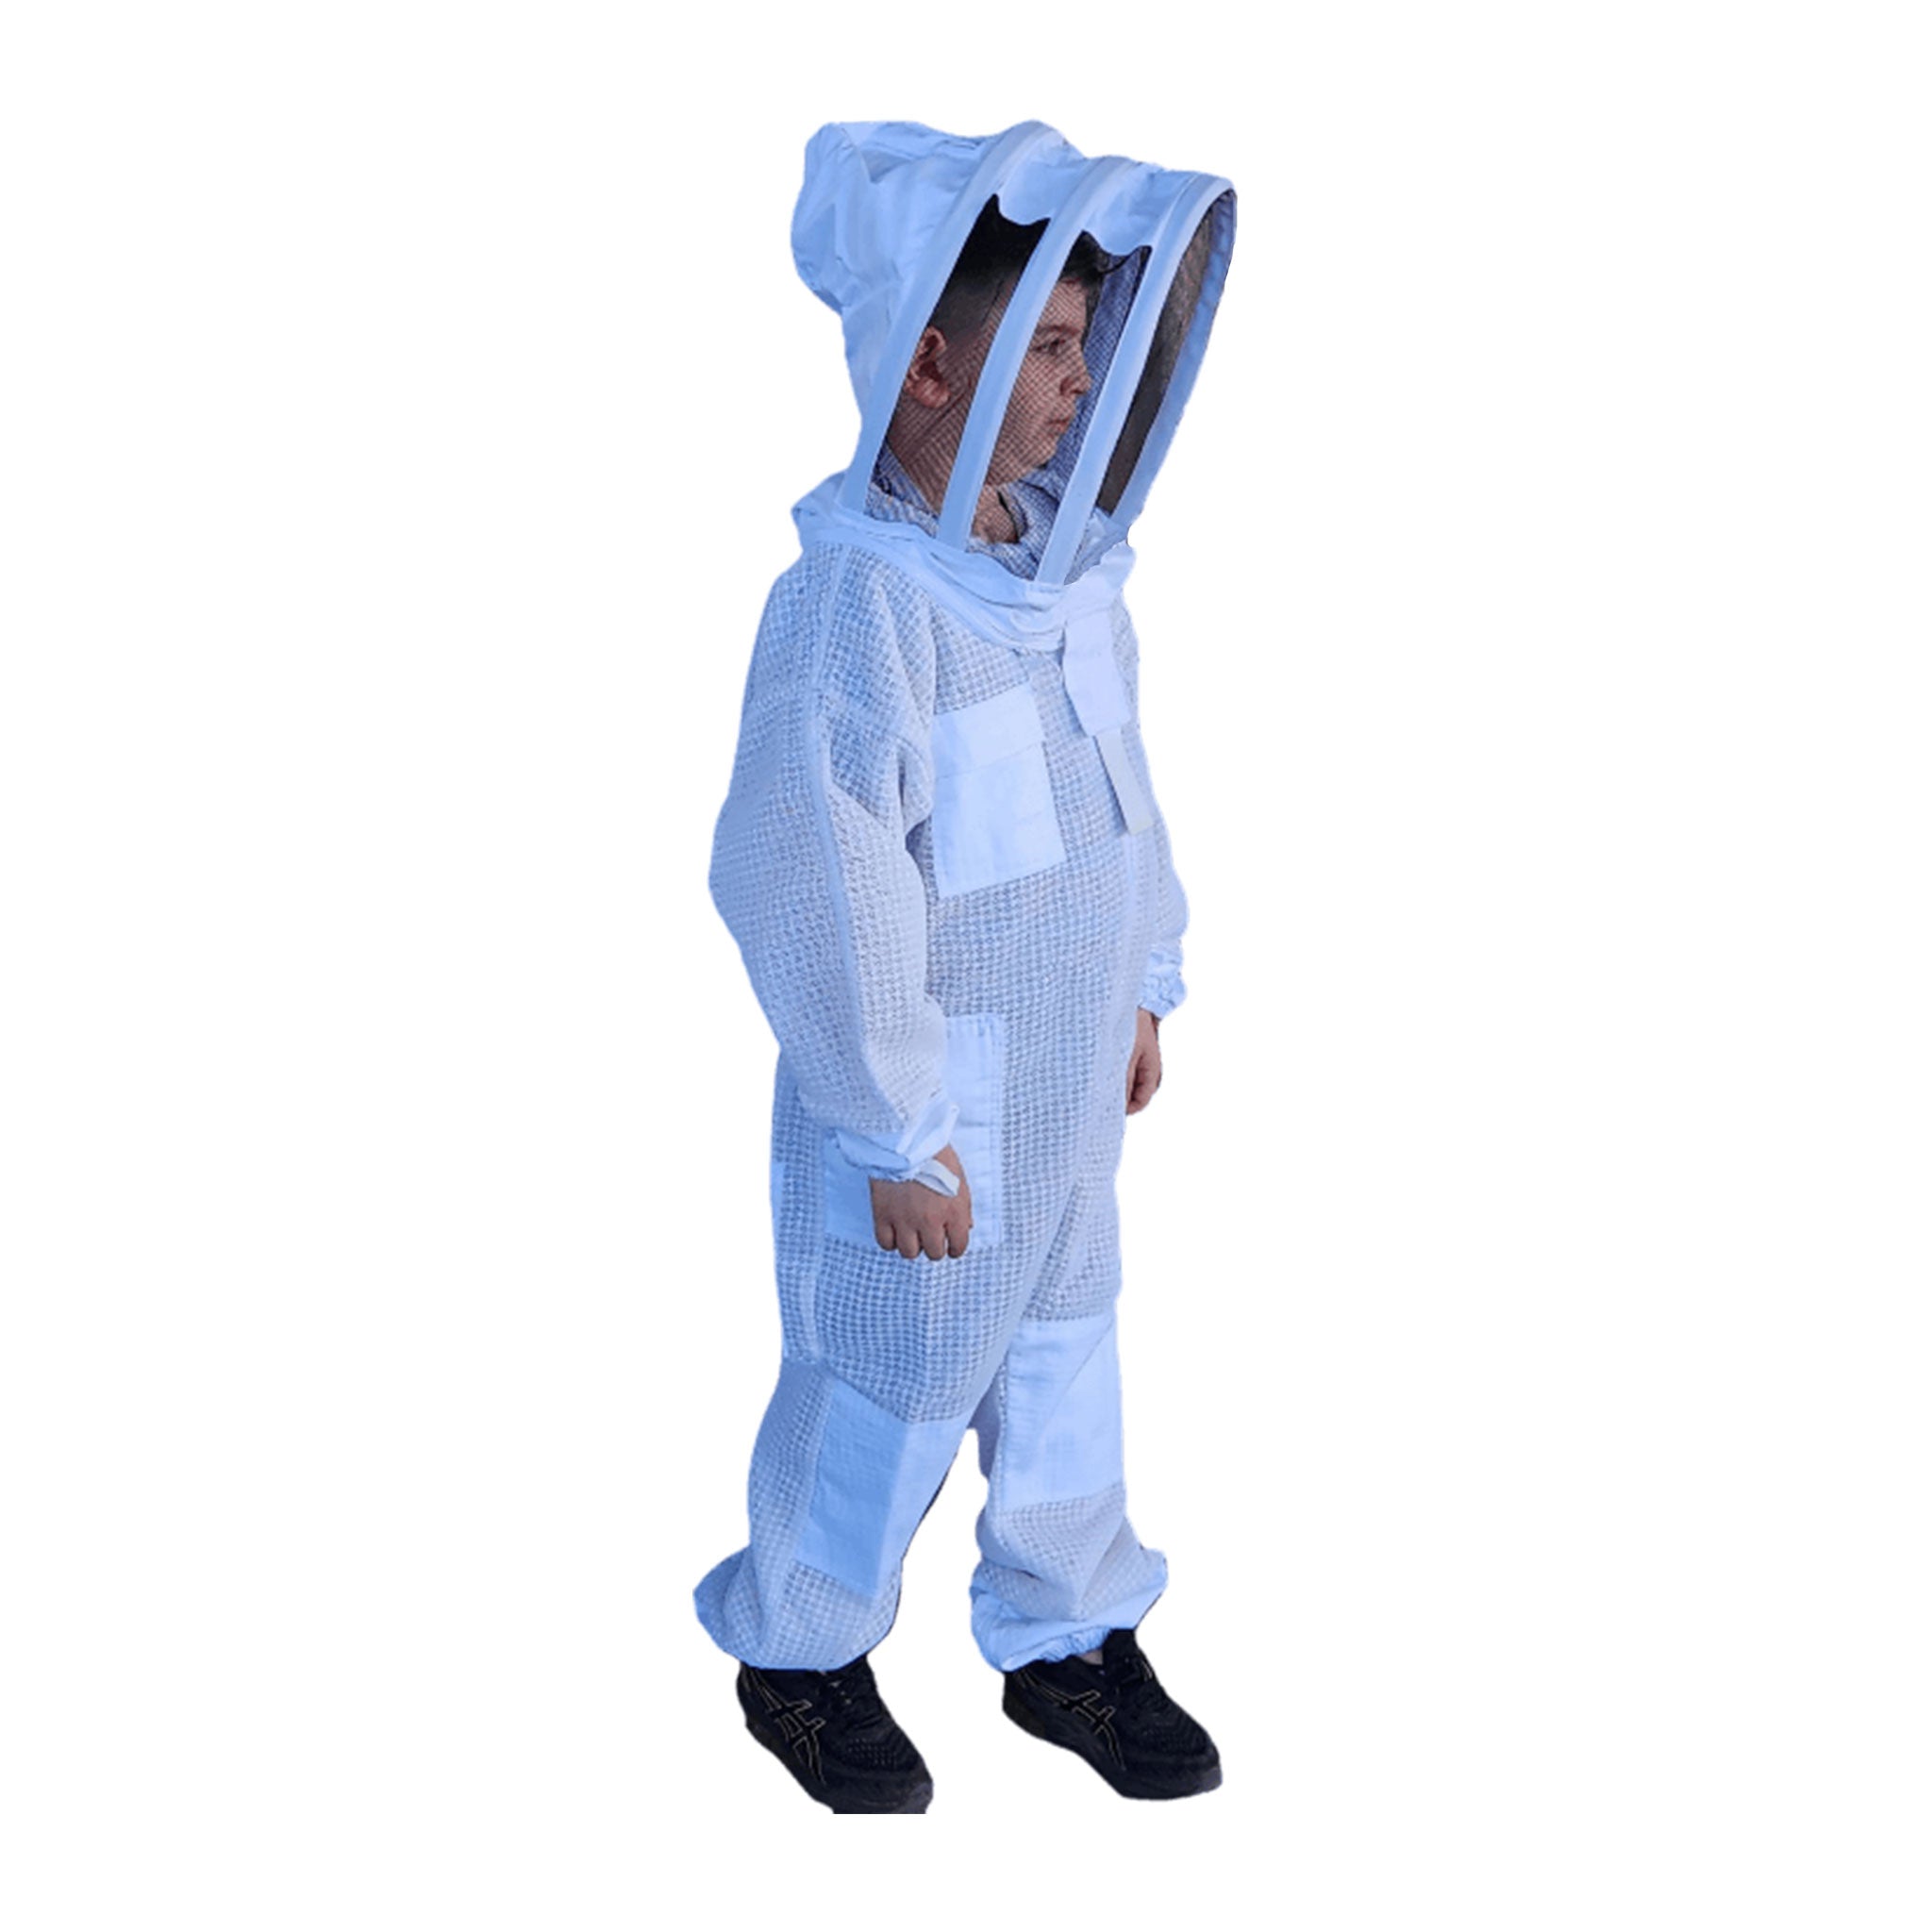 3 Layer Children's Beekeeping Suit With Fencing and Round Hat Veils - Blue Left Side